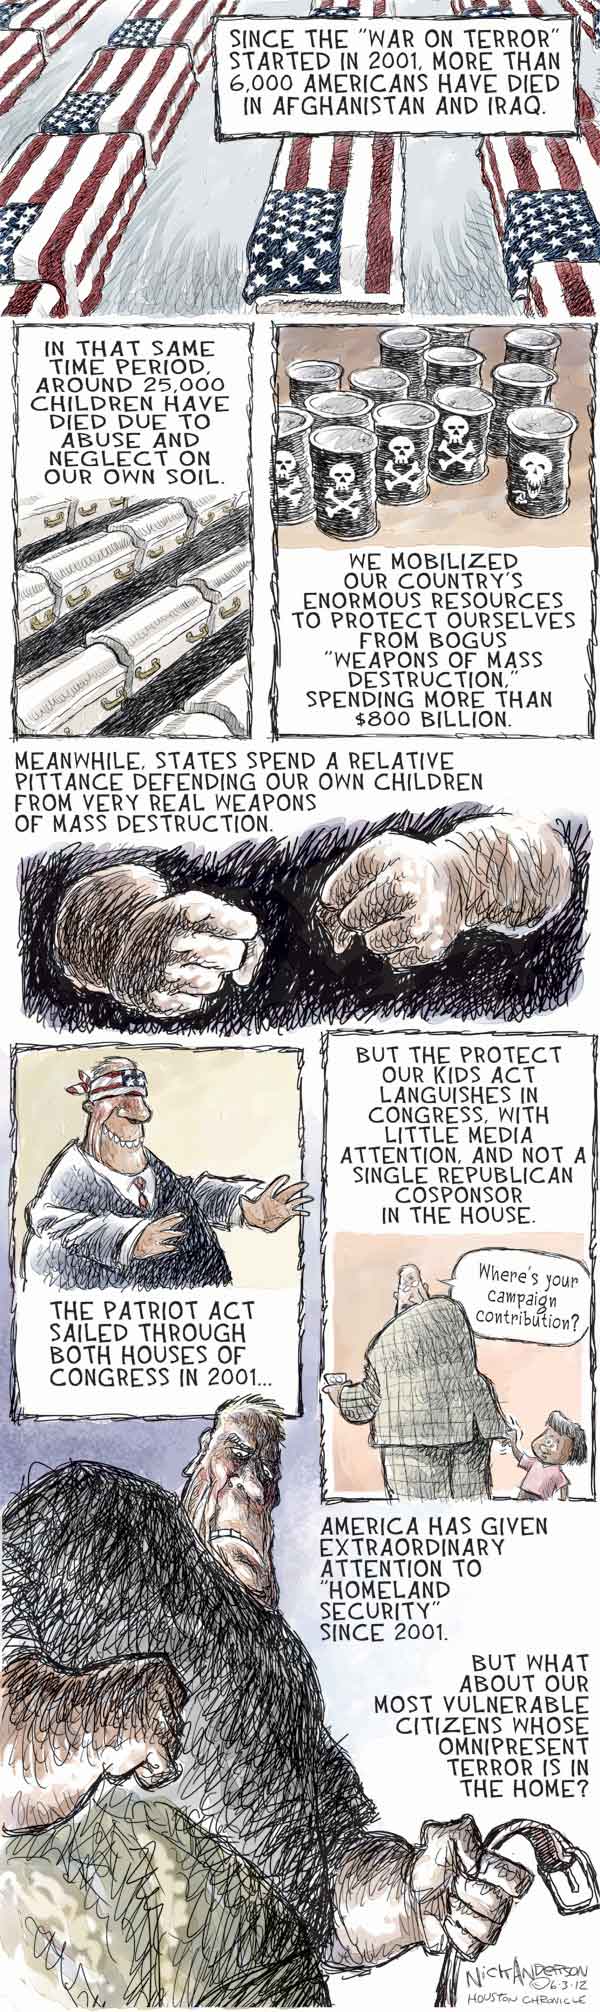 Political/Editorial Cartoon by Nick Anderson, Houston Chronicle on Obama Employing New War Tactics